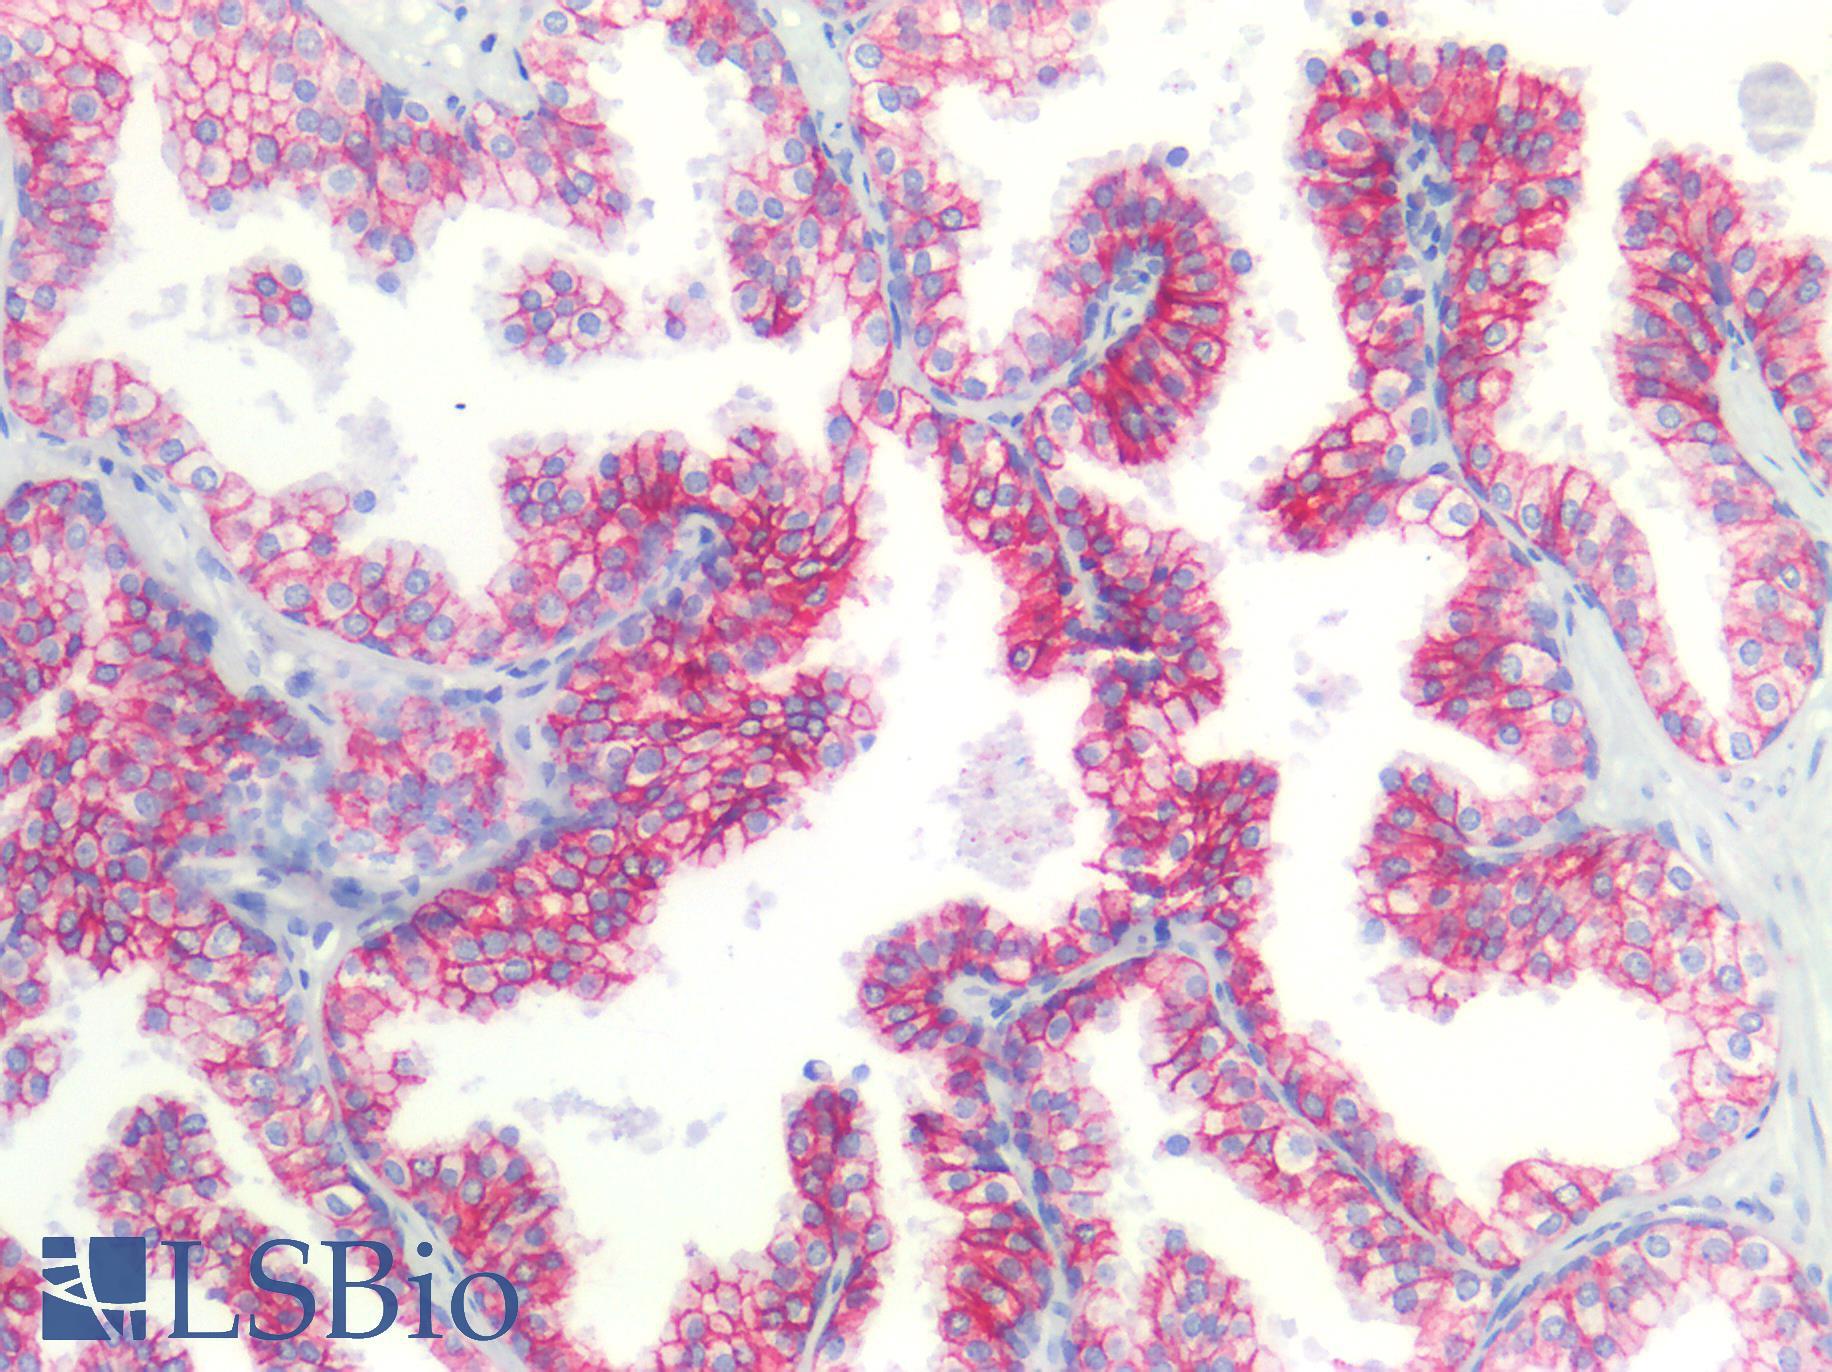 CLDN3 / Claudin 3 Antibody - Human Prostate: Formalin-Fixed, Paraffin-Embedded (FFPE)